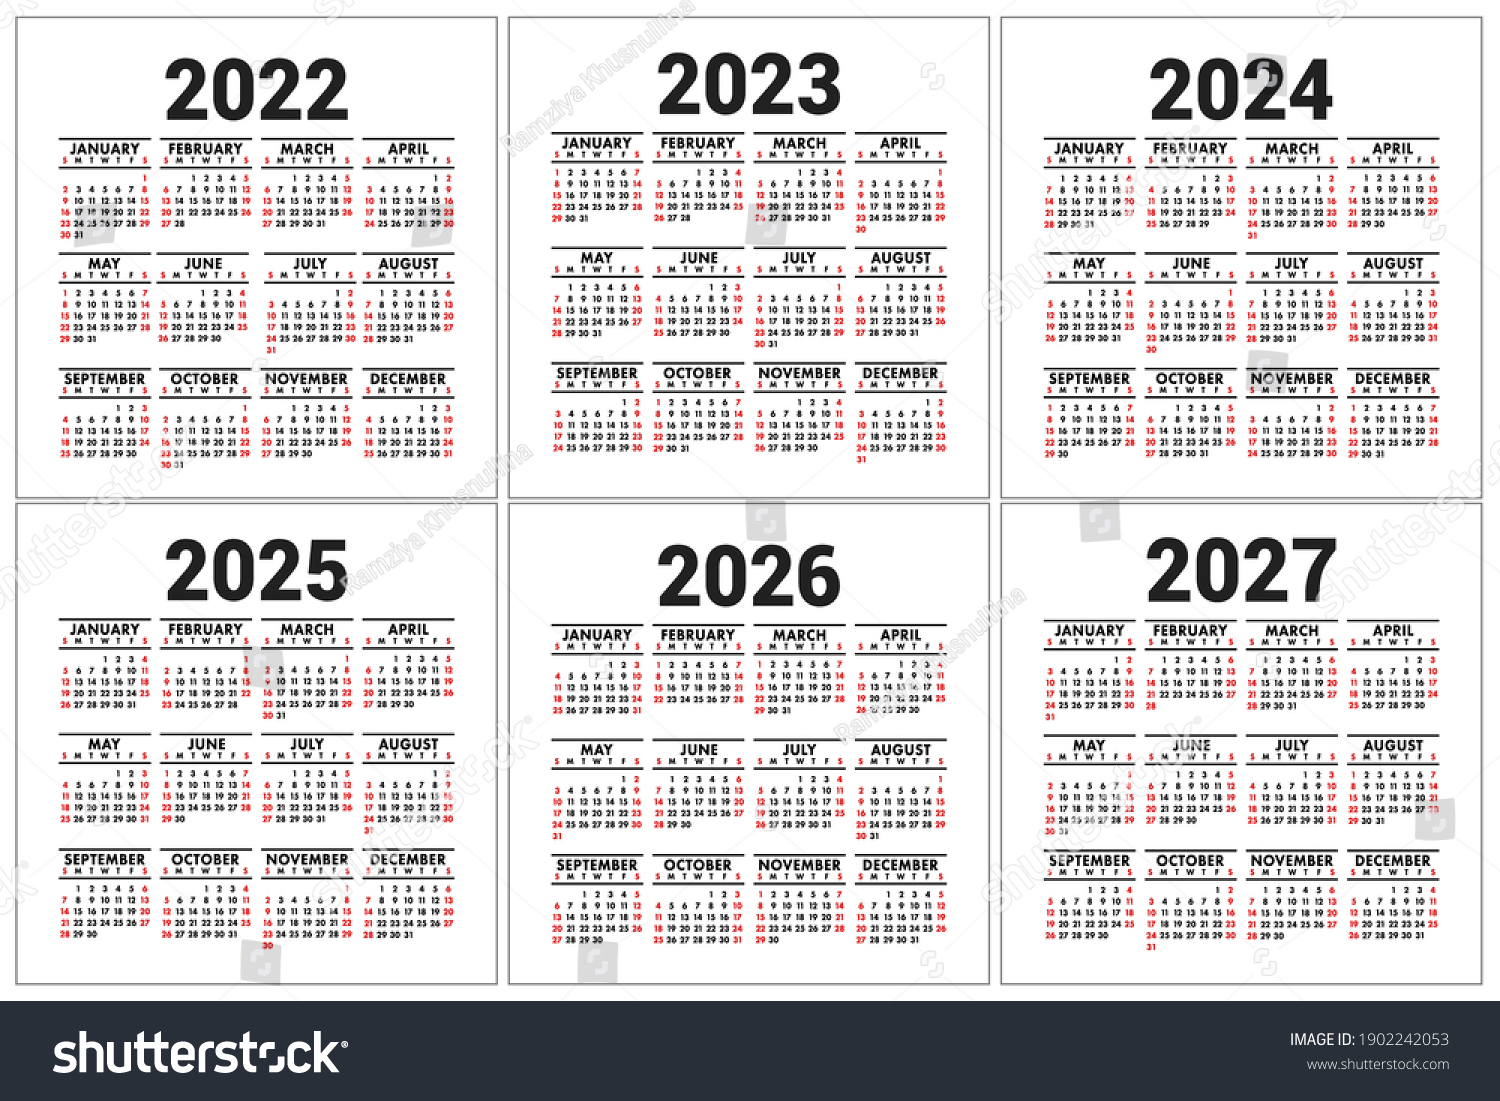 Calendar 2022 2023 2024 2025 2026 And 2027 Royalty Free Stock